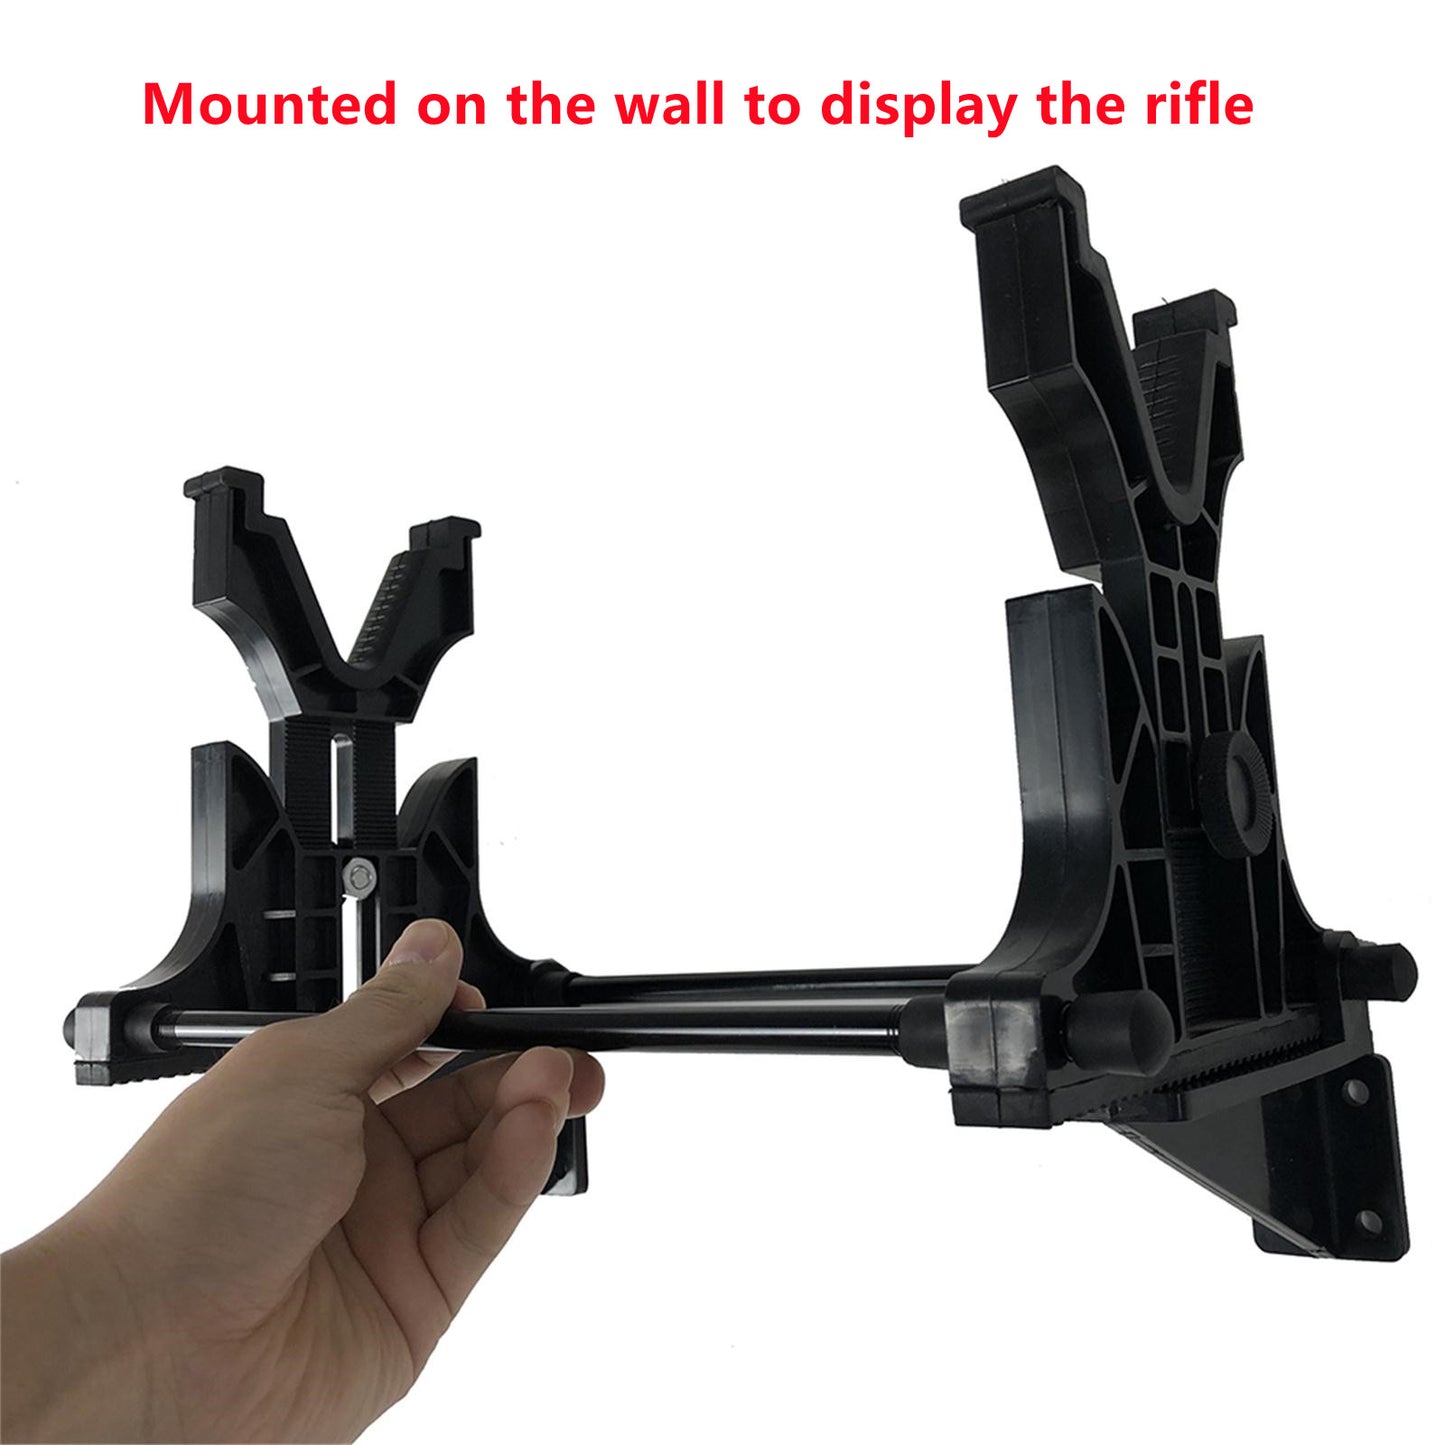 Atflbox Bench and Stand for Rifle, Handguns Accessories, Airguns Stand Display and Cleaning